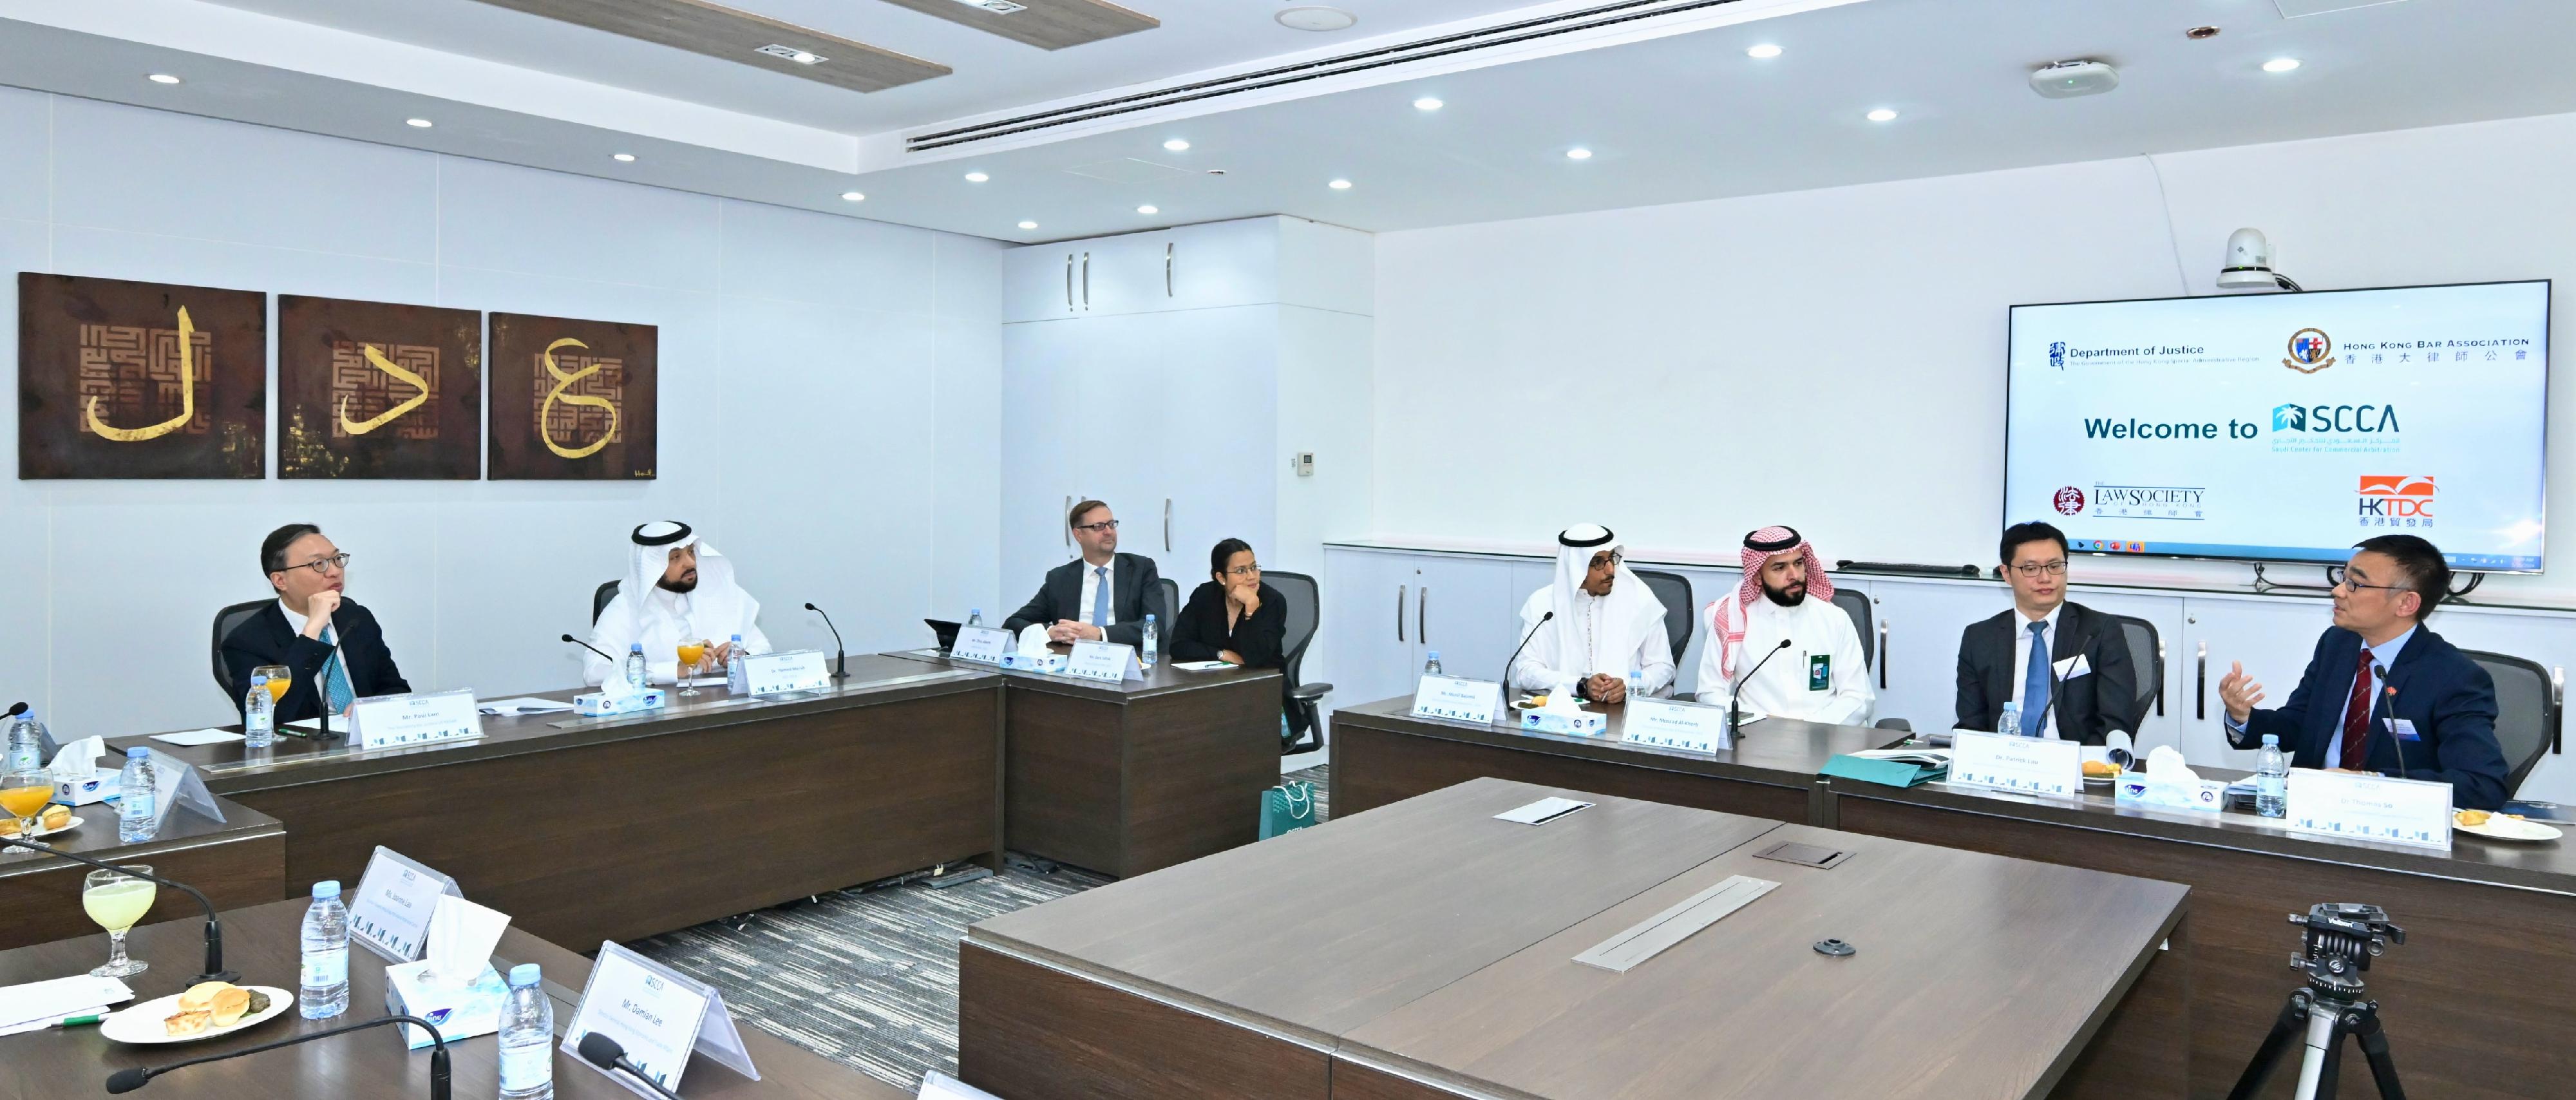 The Secretary for Justice, Mr Paul Lam, SC, continued his visit to Riyadh, Saudi Arabia, today (May 20, Riyadh time) with his about 30-person delegation, comprising representatives from the Law Society of Hong Kong, the Hong Kong Bar Association, the Hong Kong Exchanges and Clearing Limited, Invest Hong Kong and related sectors. Photo shows Mr Lam (first left) and his delegation meeting with the Chief Executive Officer of the Saudi Center for Commercial Arbitration (SCCA), Dr Hamed Merah (second left), and the board of directors of the SCCA.
